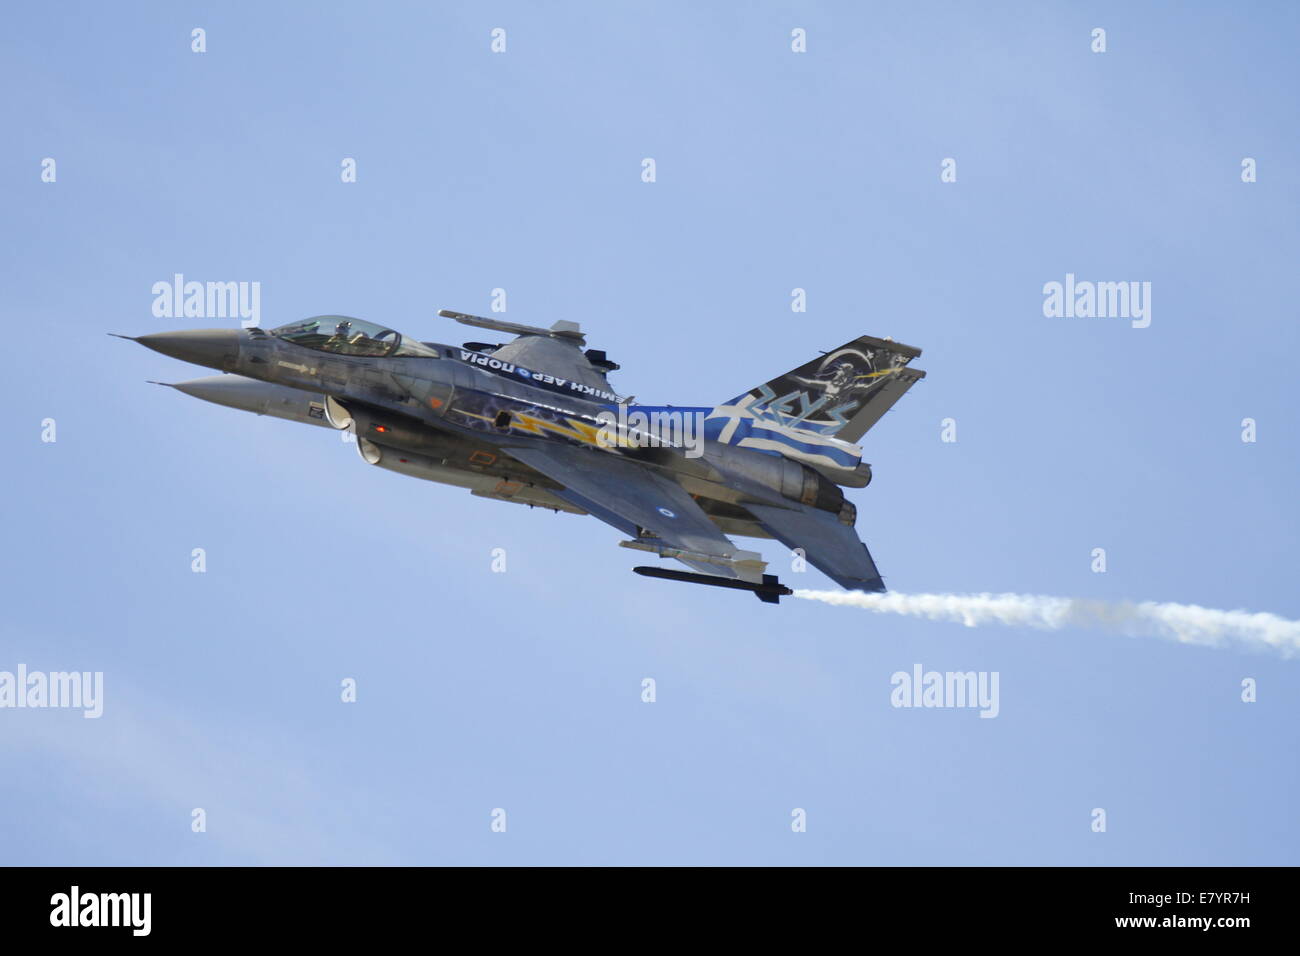 Acharnes, Greece. 26th September 2014. An Hellenic Air Force F-16 Block 52+ from the Demo Team Zeus (front) and a F-16AM from the Royal Netherlands Air Force (back) perform at the 2014 Tatoi Airshow. The Tatoi Air Show, the main public event of the 3rd Athens Flying Week 2014, started with a performance by acrobatic teams and demo teams from foreign Air Forces at Tatoi Airport near Athens in Greece. Credit:  Michael Debets/Alamy Live News Stock Photo